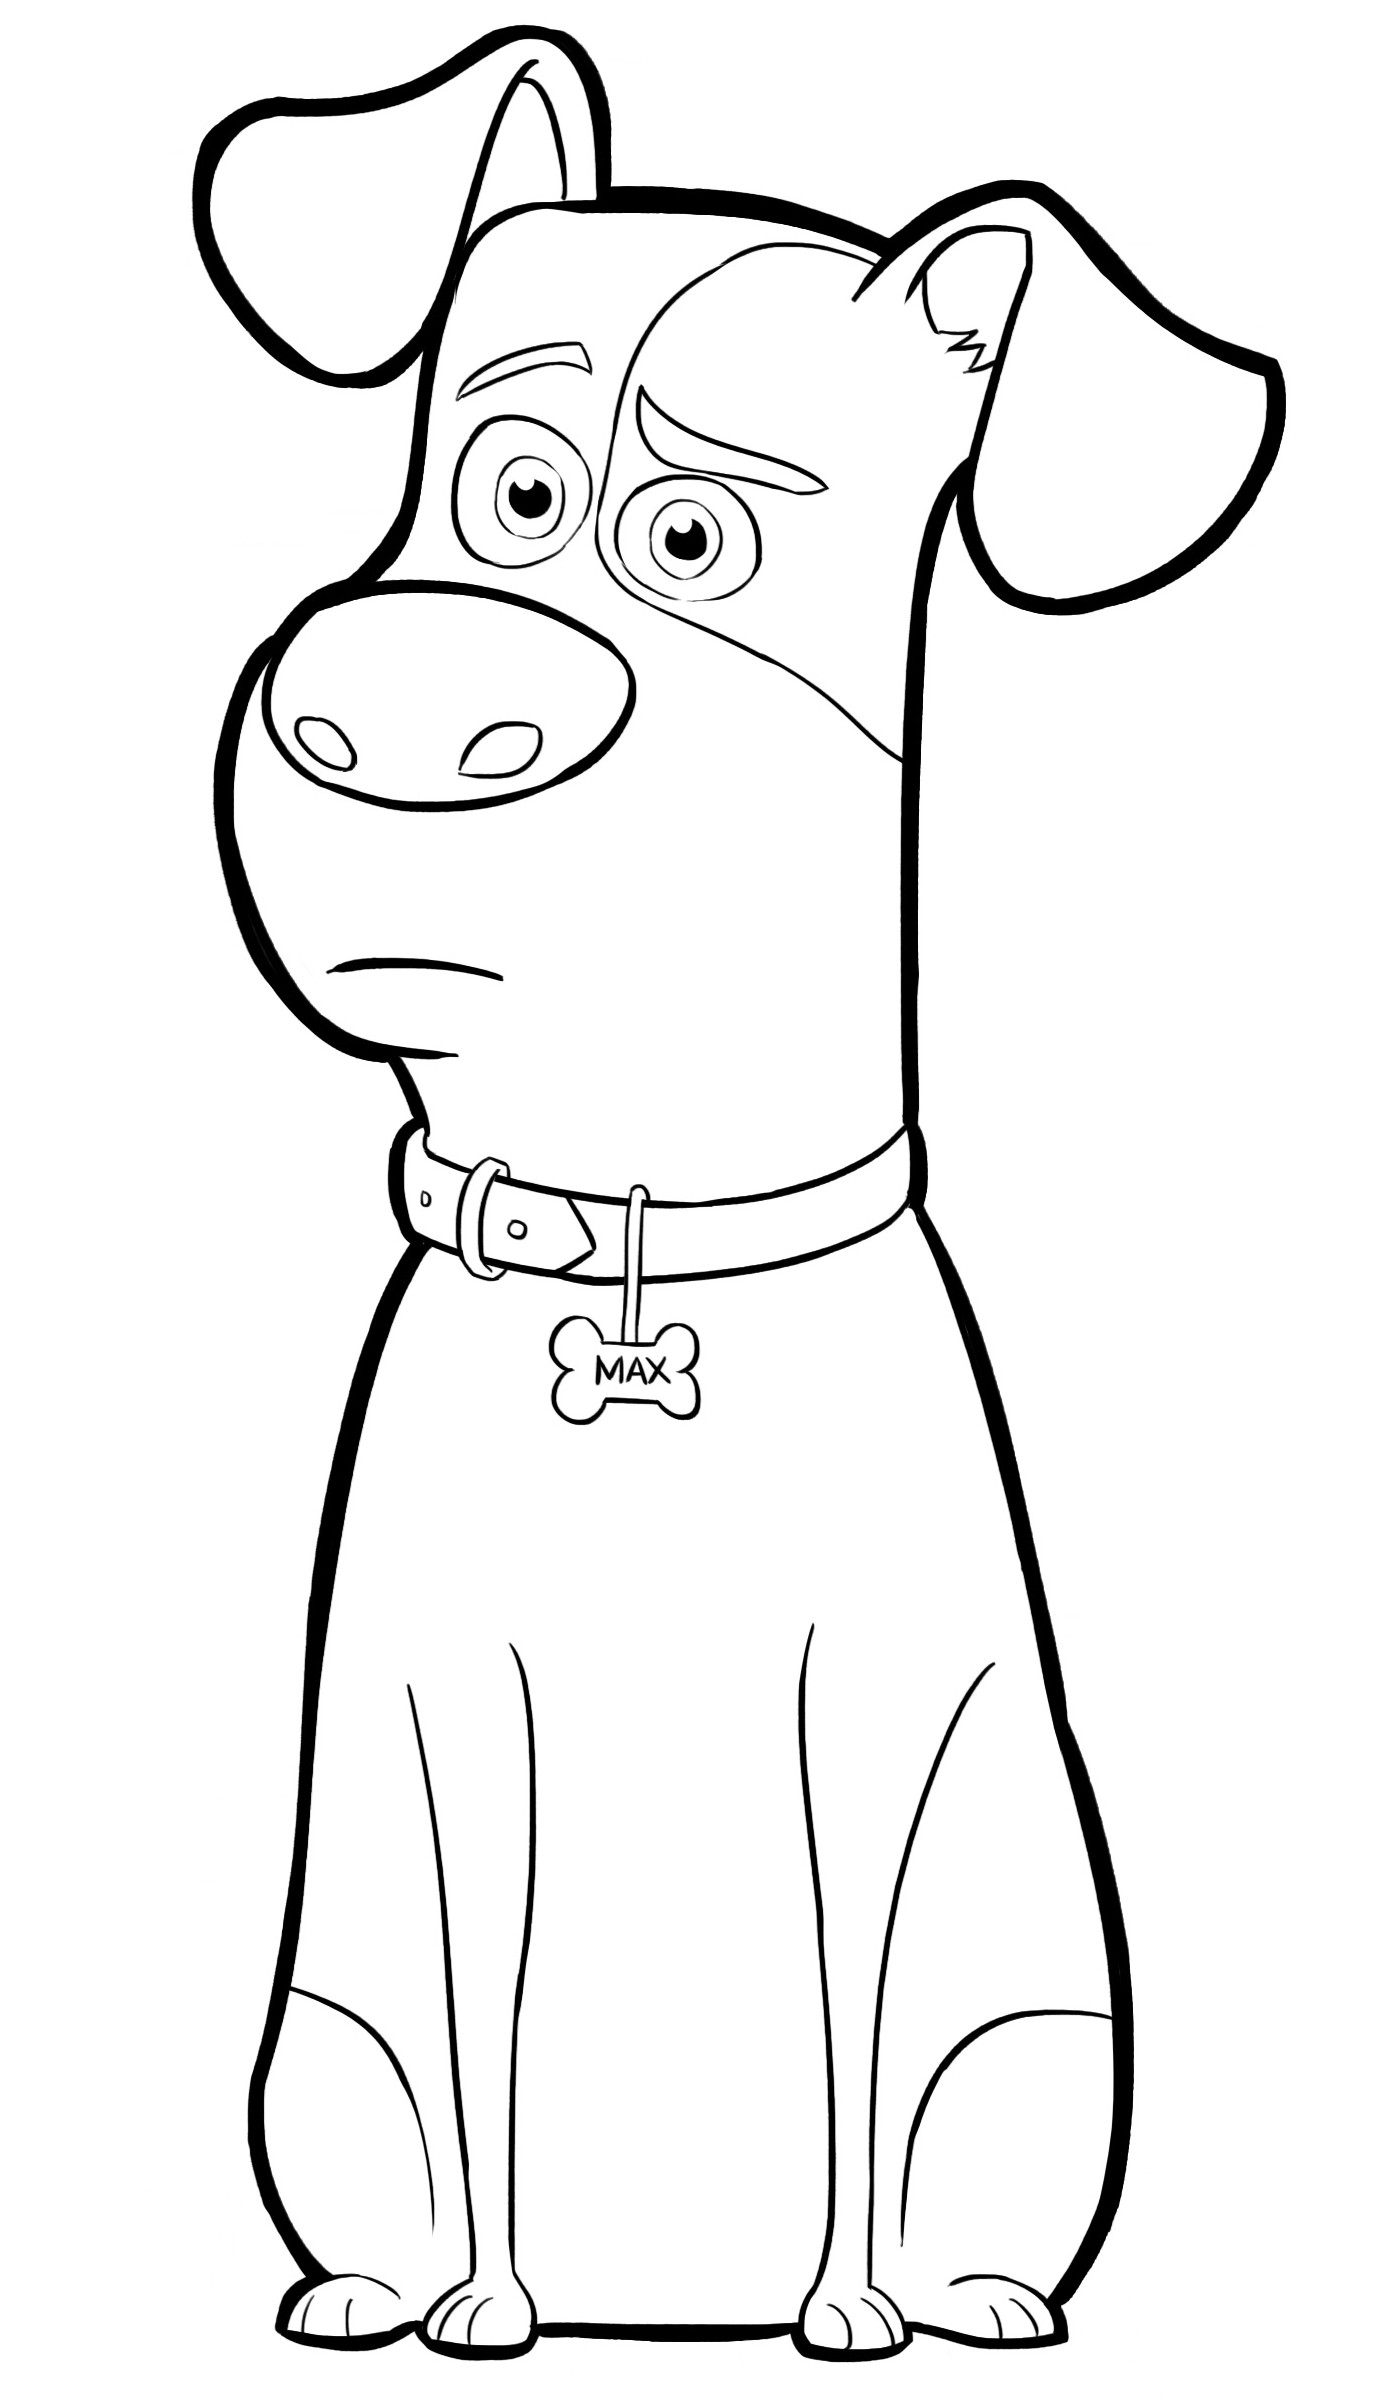 Printable Coloring Pages For Toddlers
 Pets Coloring Pages Best Coloring Pages For Kids